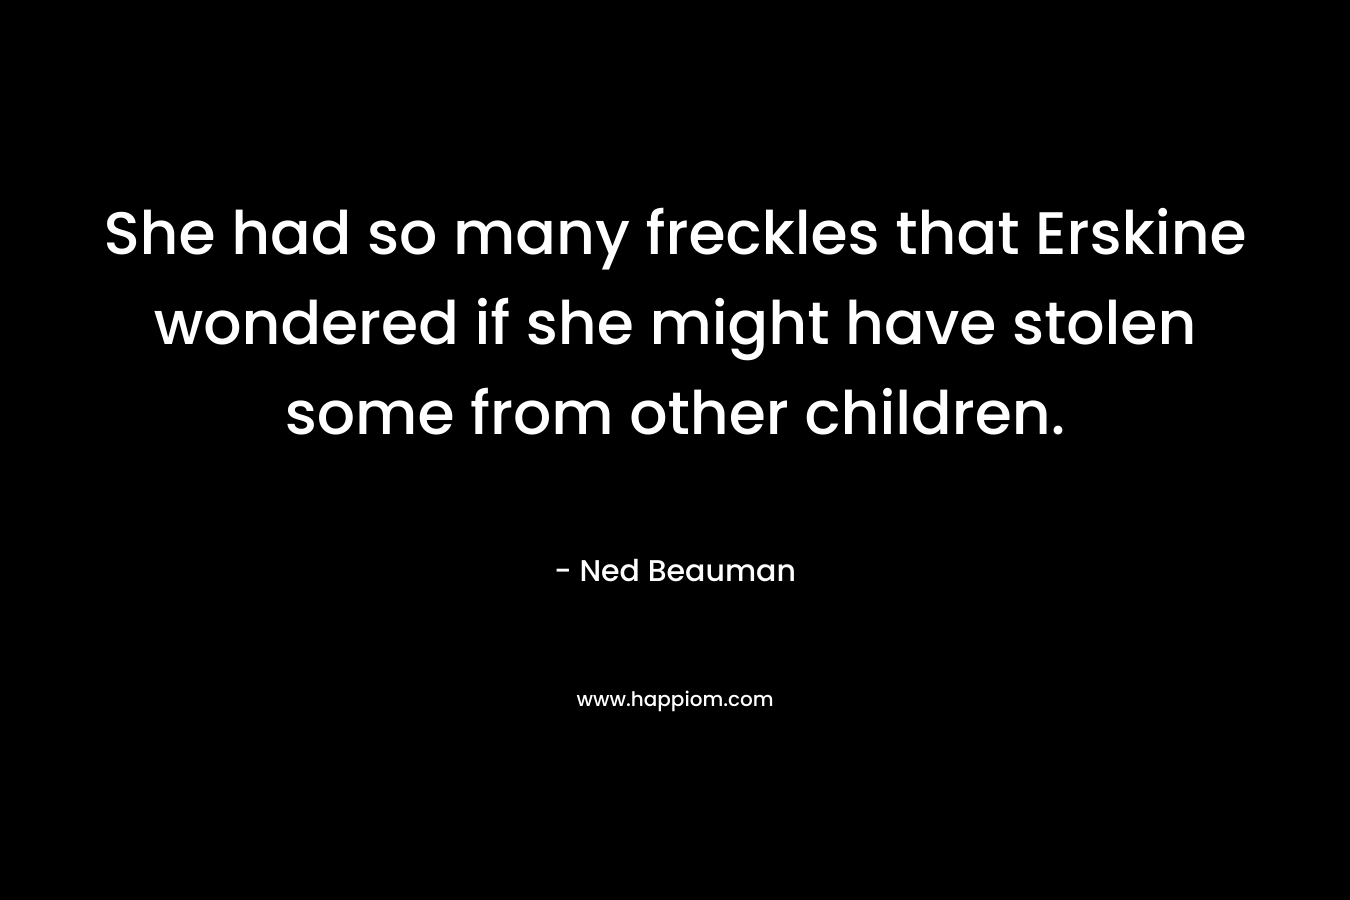 She had so many freckles that Erskine wondered if she might have stolen some from other children. – Ned Beauman